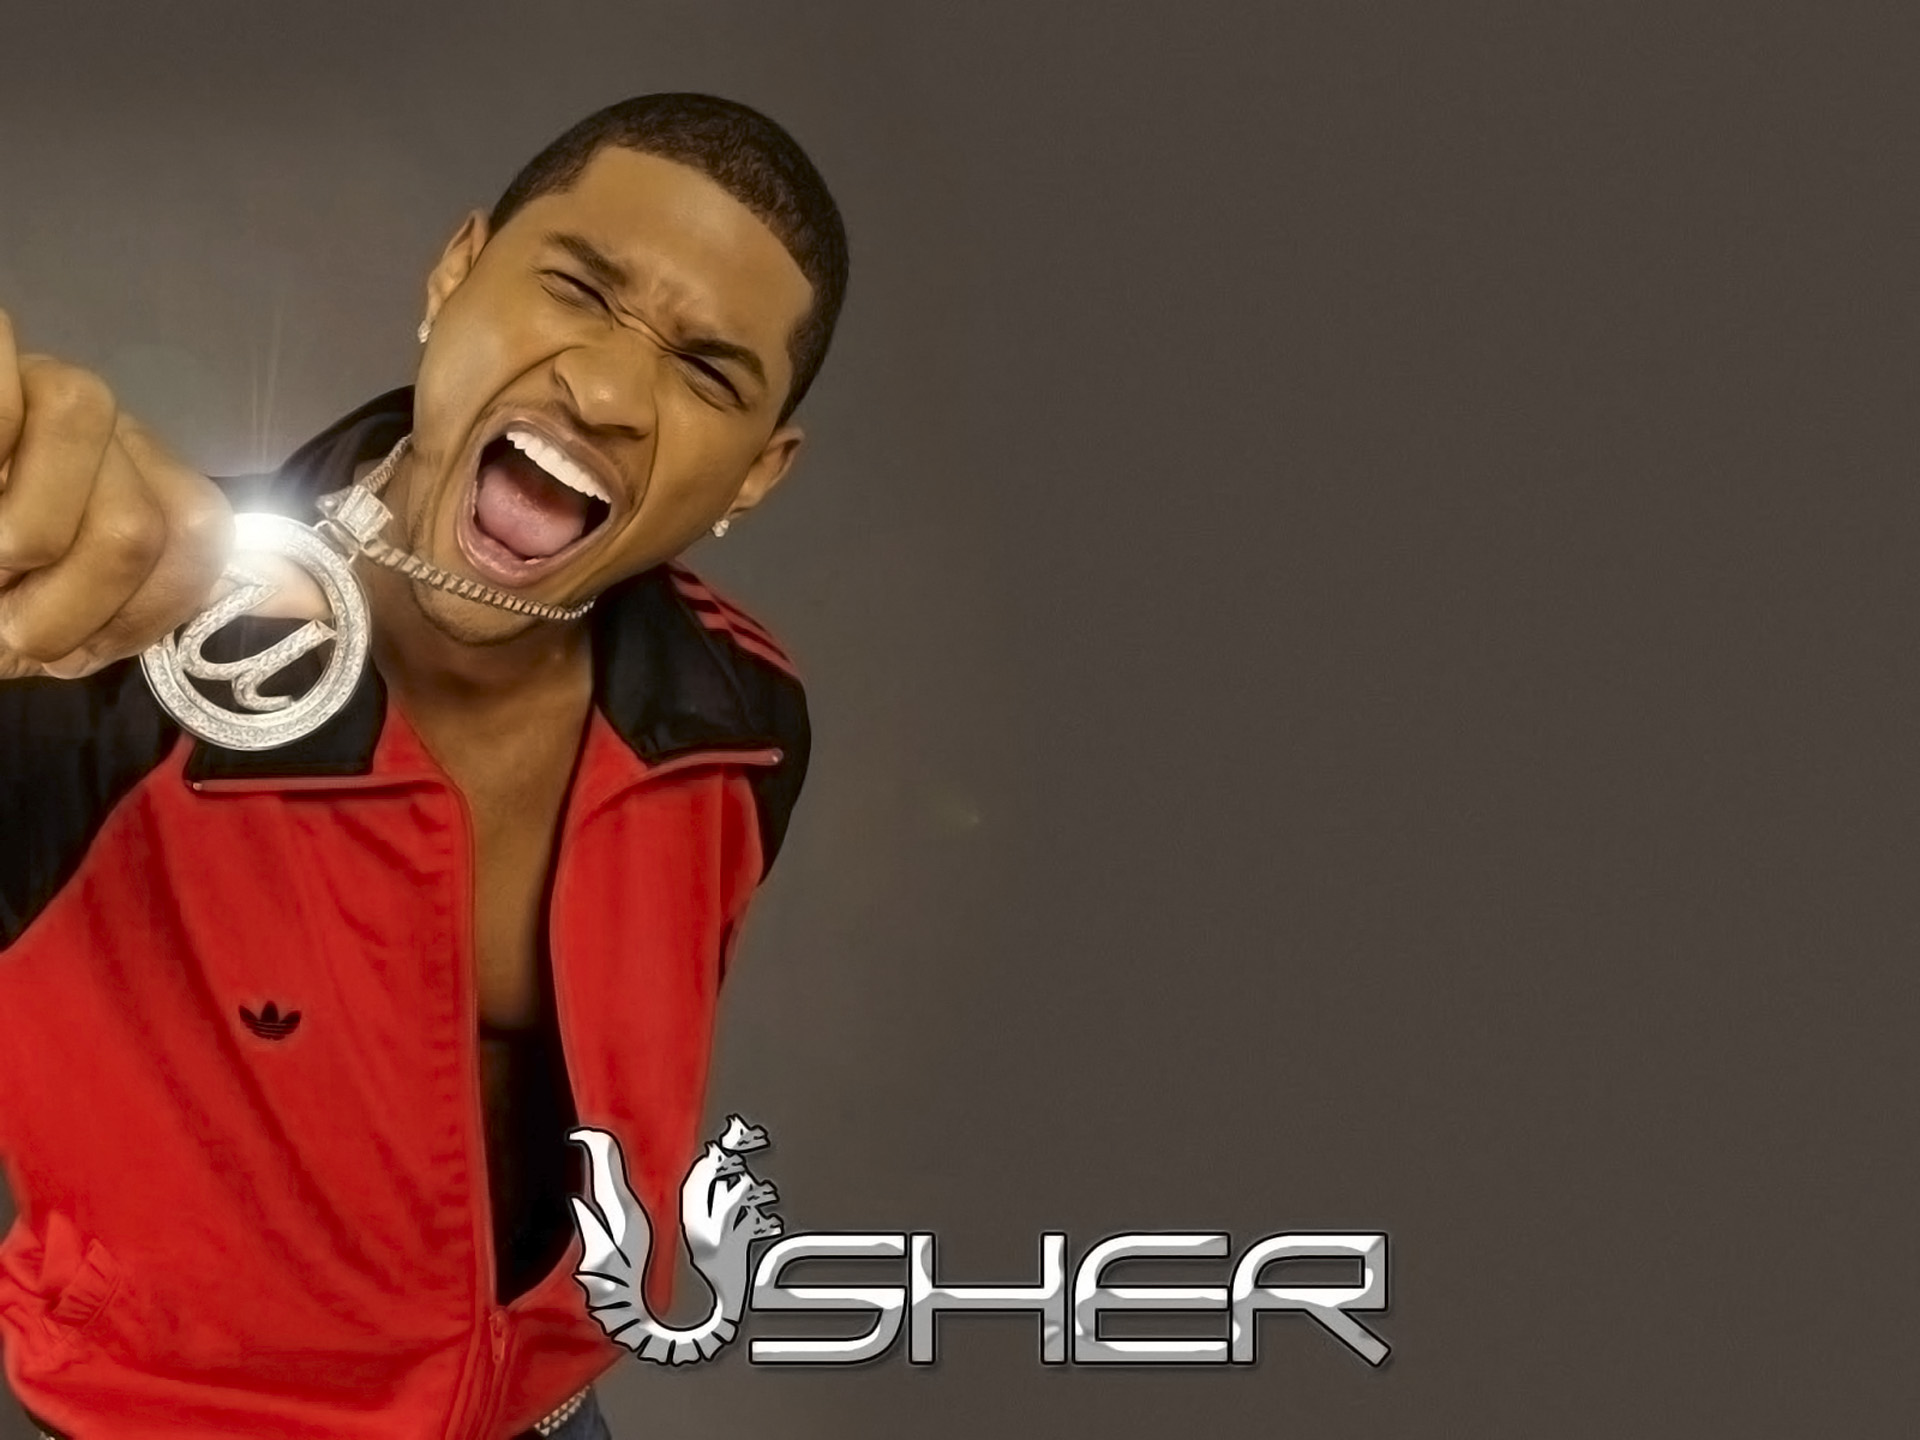 Usher HD Wallpapers - HD Wallpapers Backgrounds of Your Choice